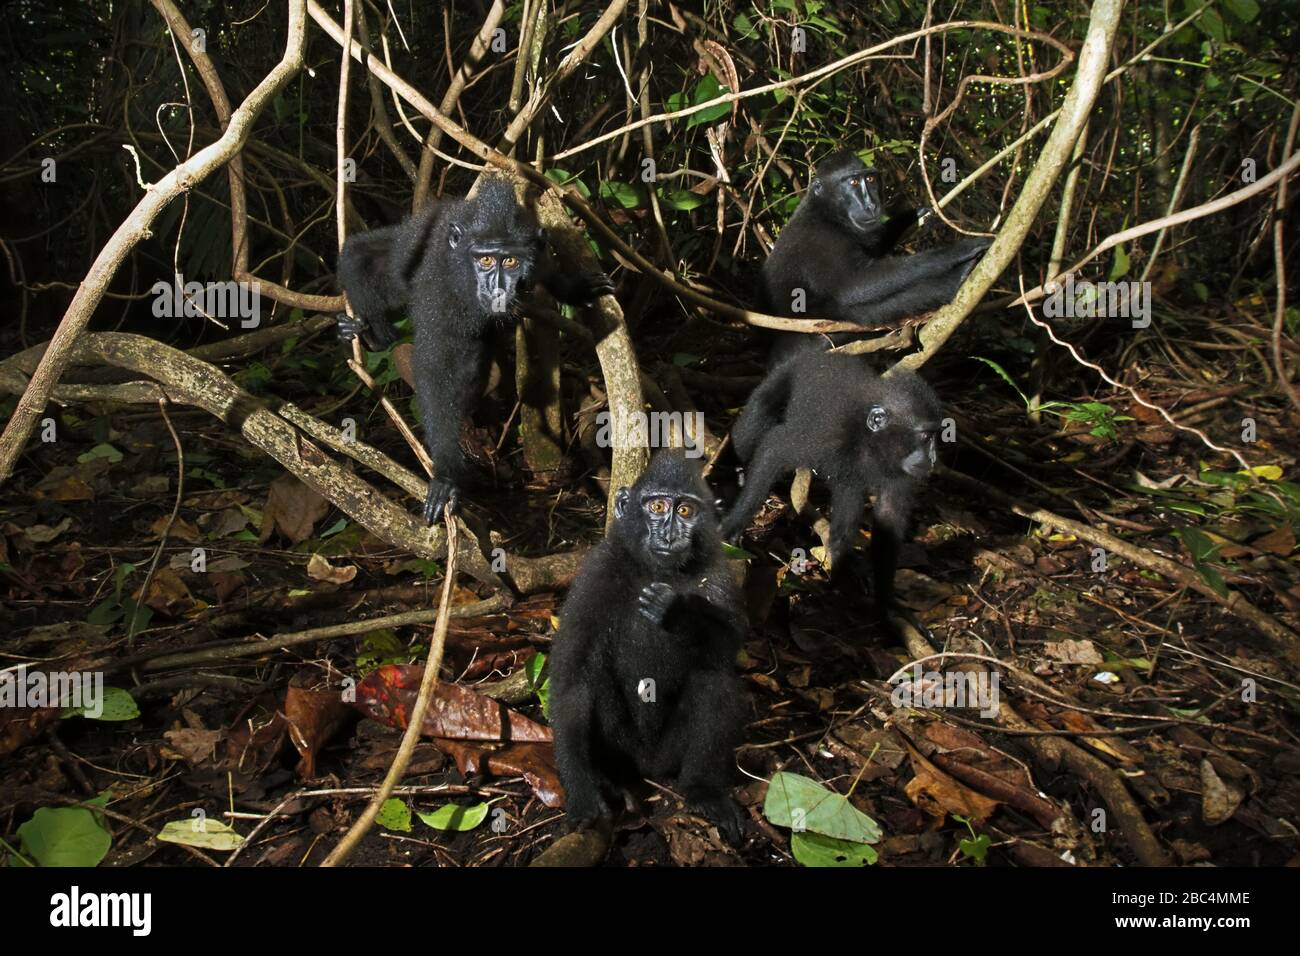 A troop of Celebes crested macaque (Macaca nigra) juveniles are looking curiously on camera in Tangkoko forest, North Sulawesi, Indonesia. Stock Photo